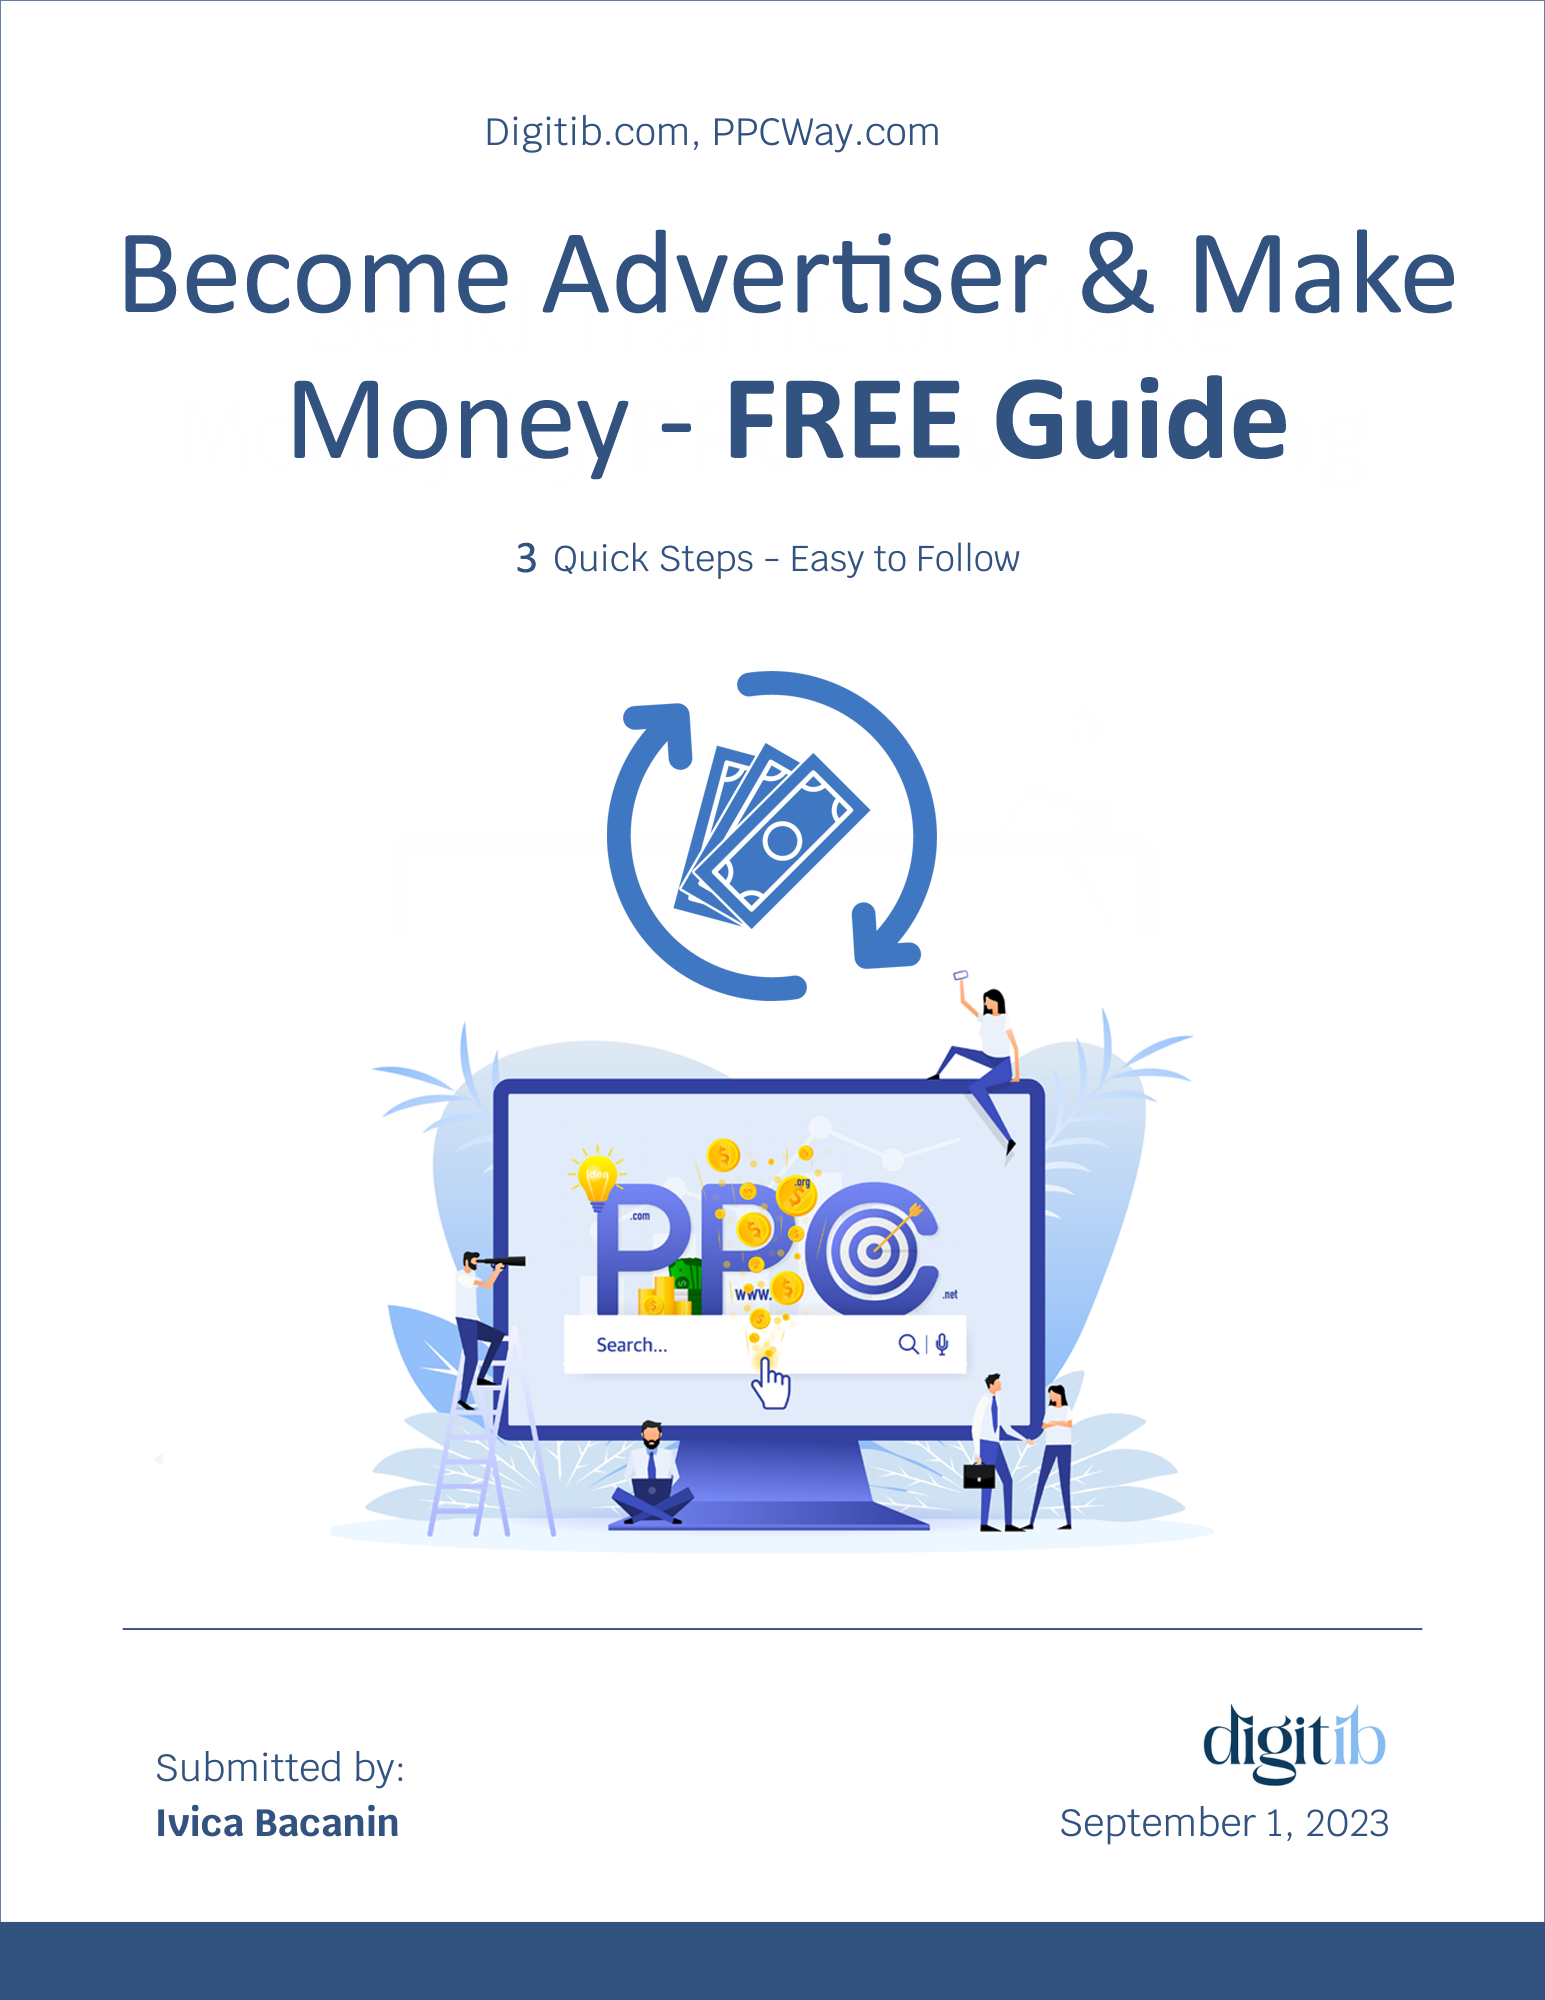 Become Advertiser and Make Money FREE Guide